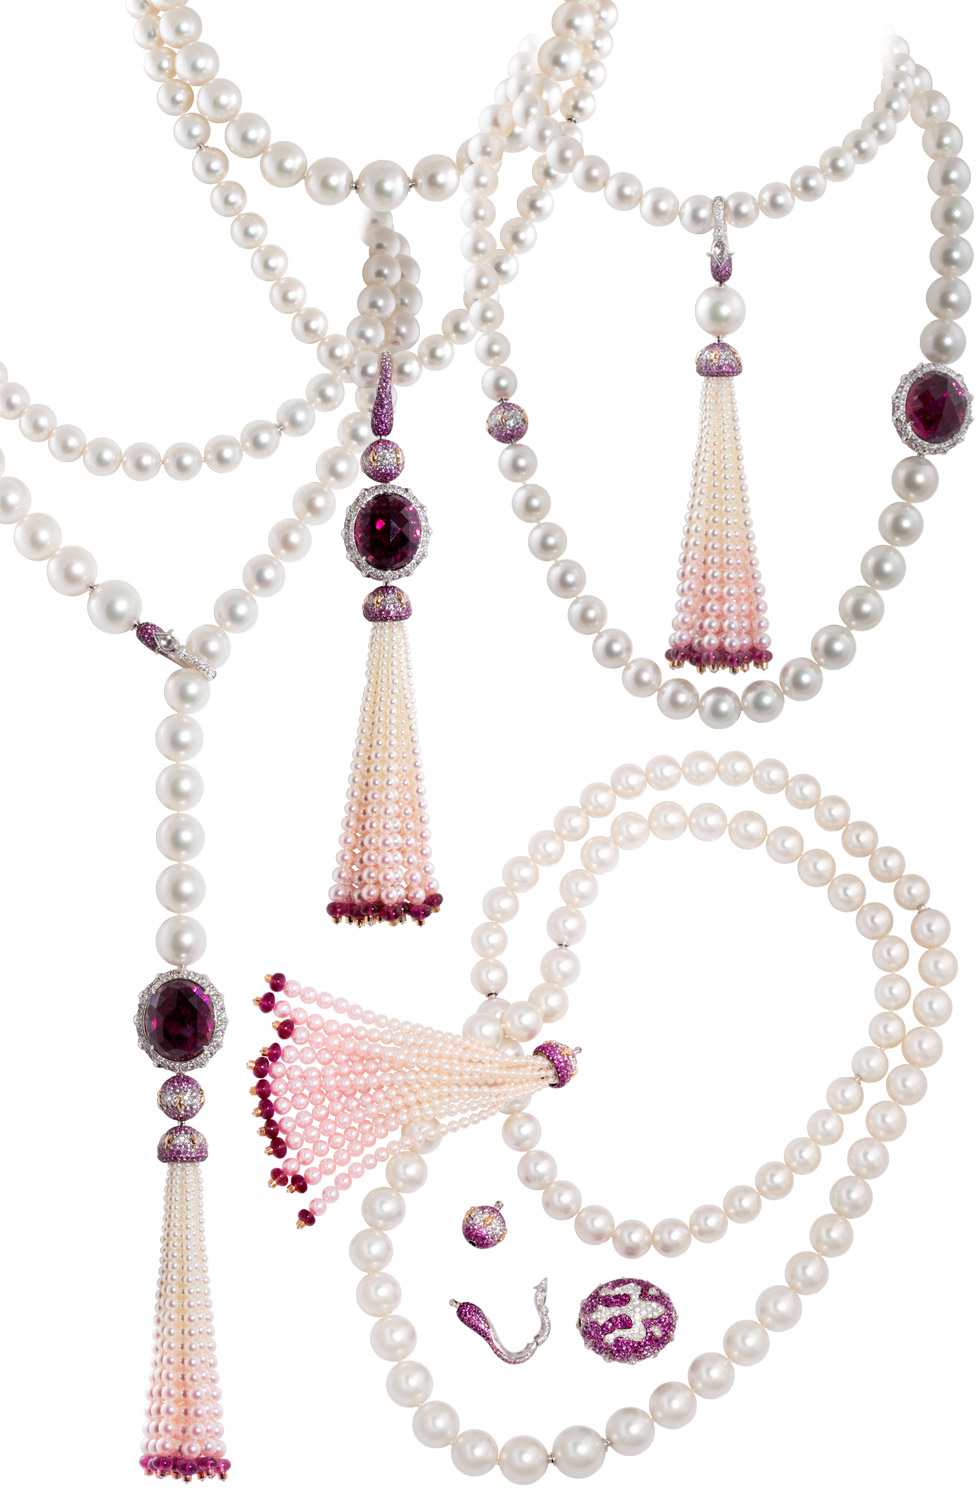 Alessio Boschi transformable necklace with South Sea pearl and an oval rubellite